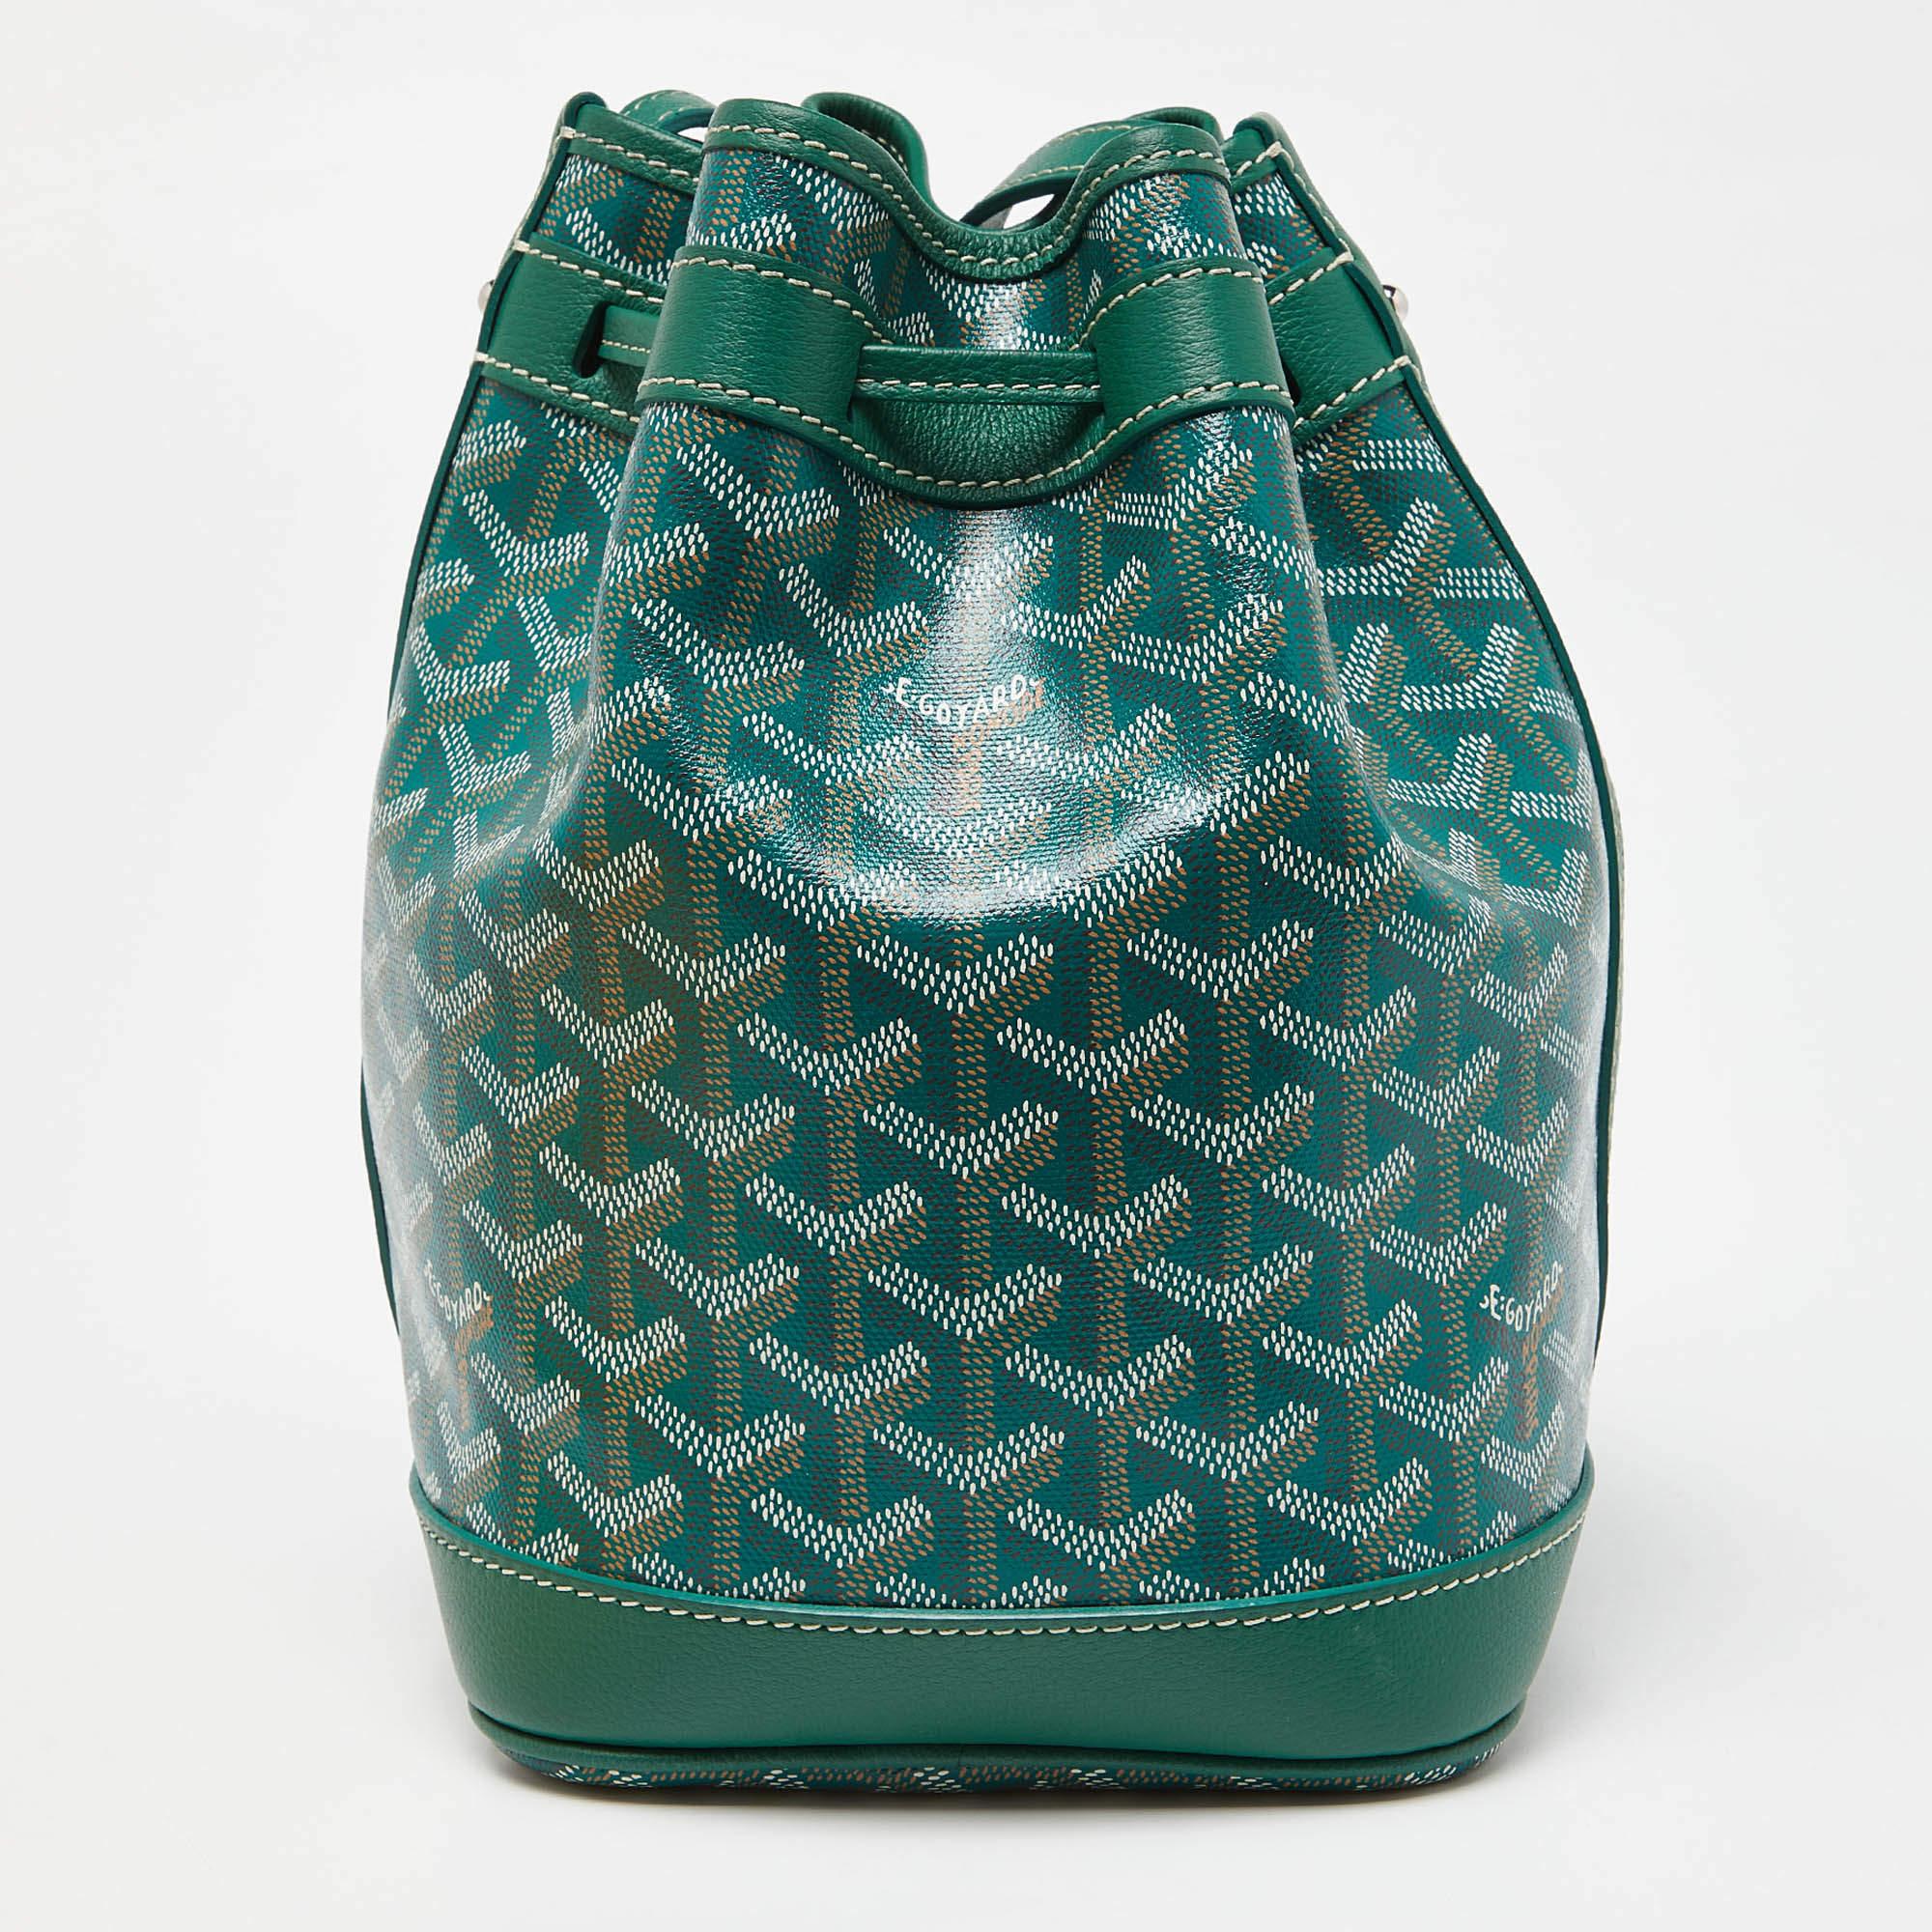 The Goyard Flot bucket bag is a stylish and compact accessory designed for fashion-conscious individuals. Crafted with a combination of coated canvas and leather materials, this bag showcases the iconic Goyardine print in green, offering a touch of